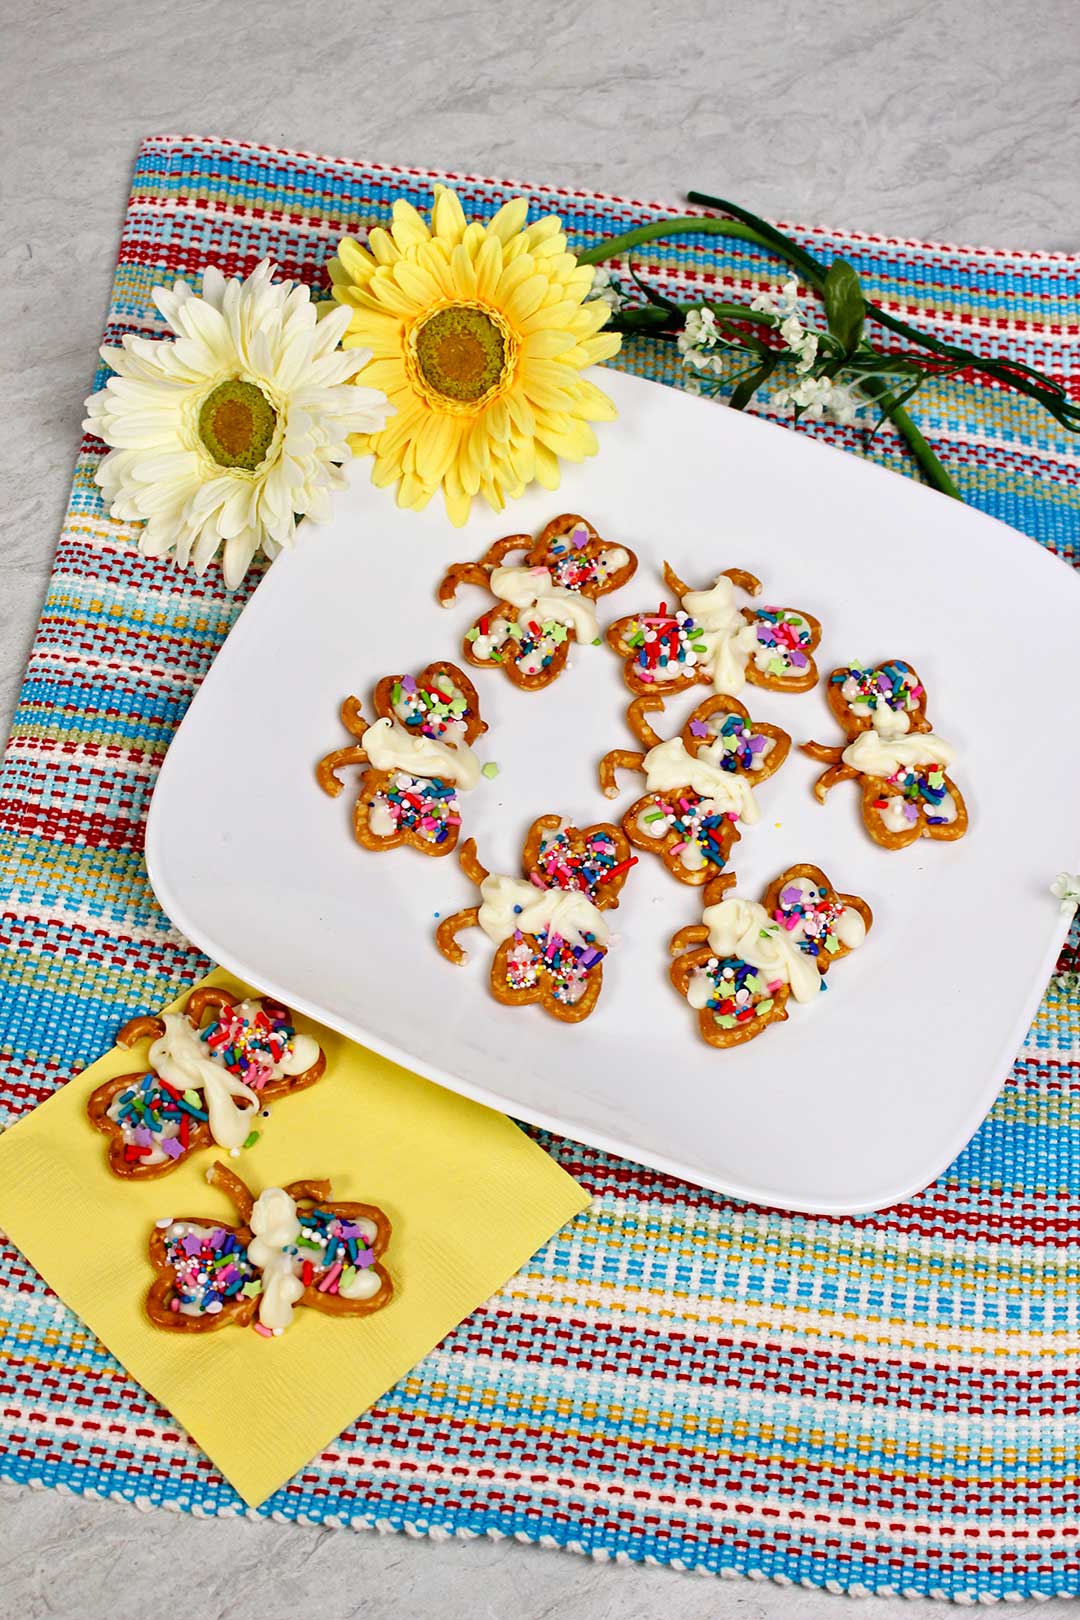 Decorated Butterfly Pretzel Cookies displayed on a yellow napkin near yellow flowers.